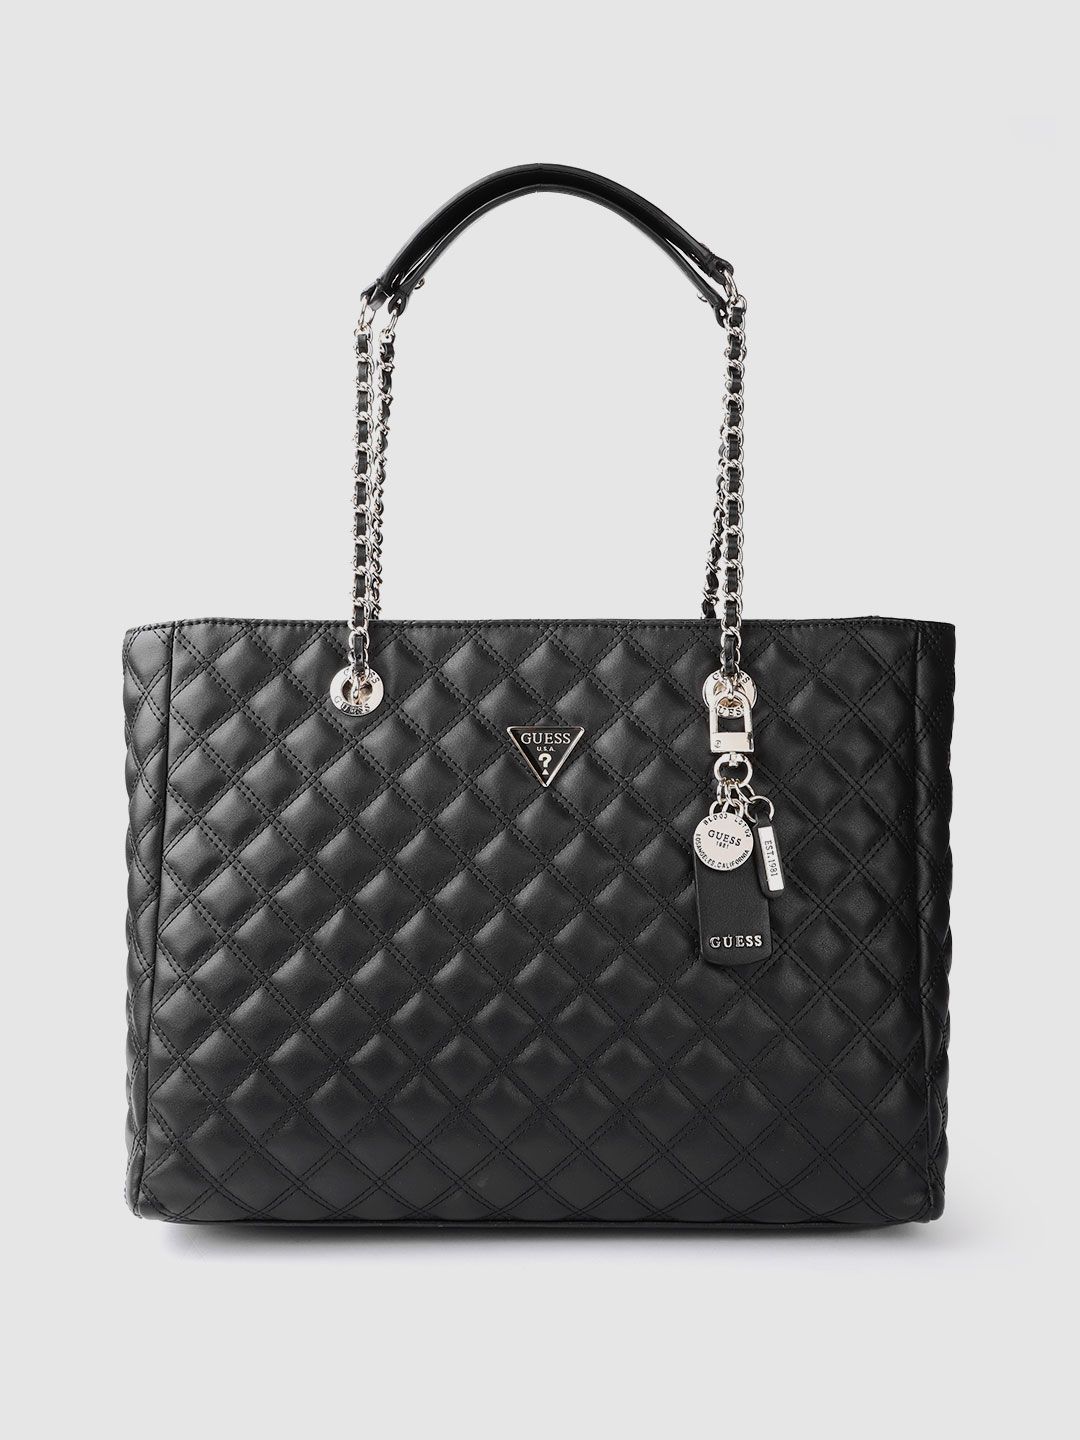 GUESS Women Black Solid Quilted Structured Handheld Bag Price in India